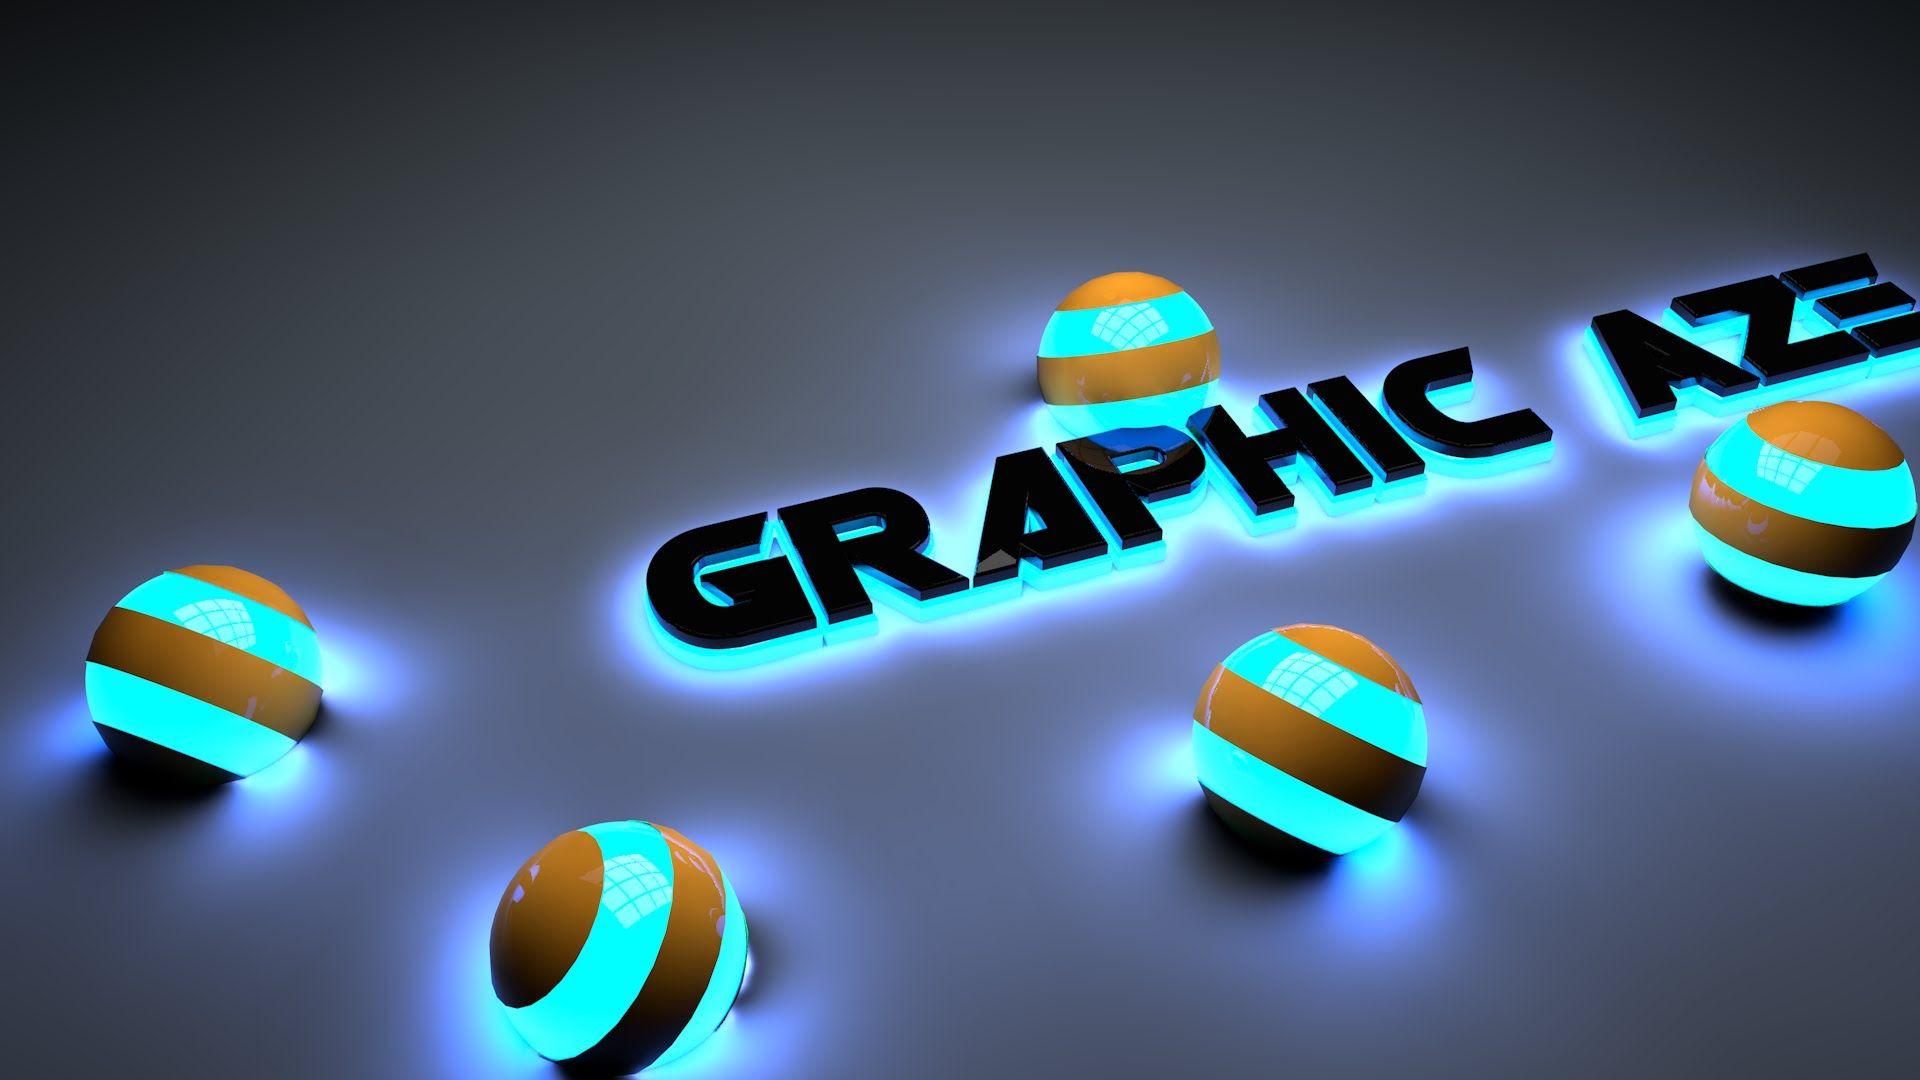 How to create wallpaper templates with Cinema 4D - Wallpaper